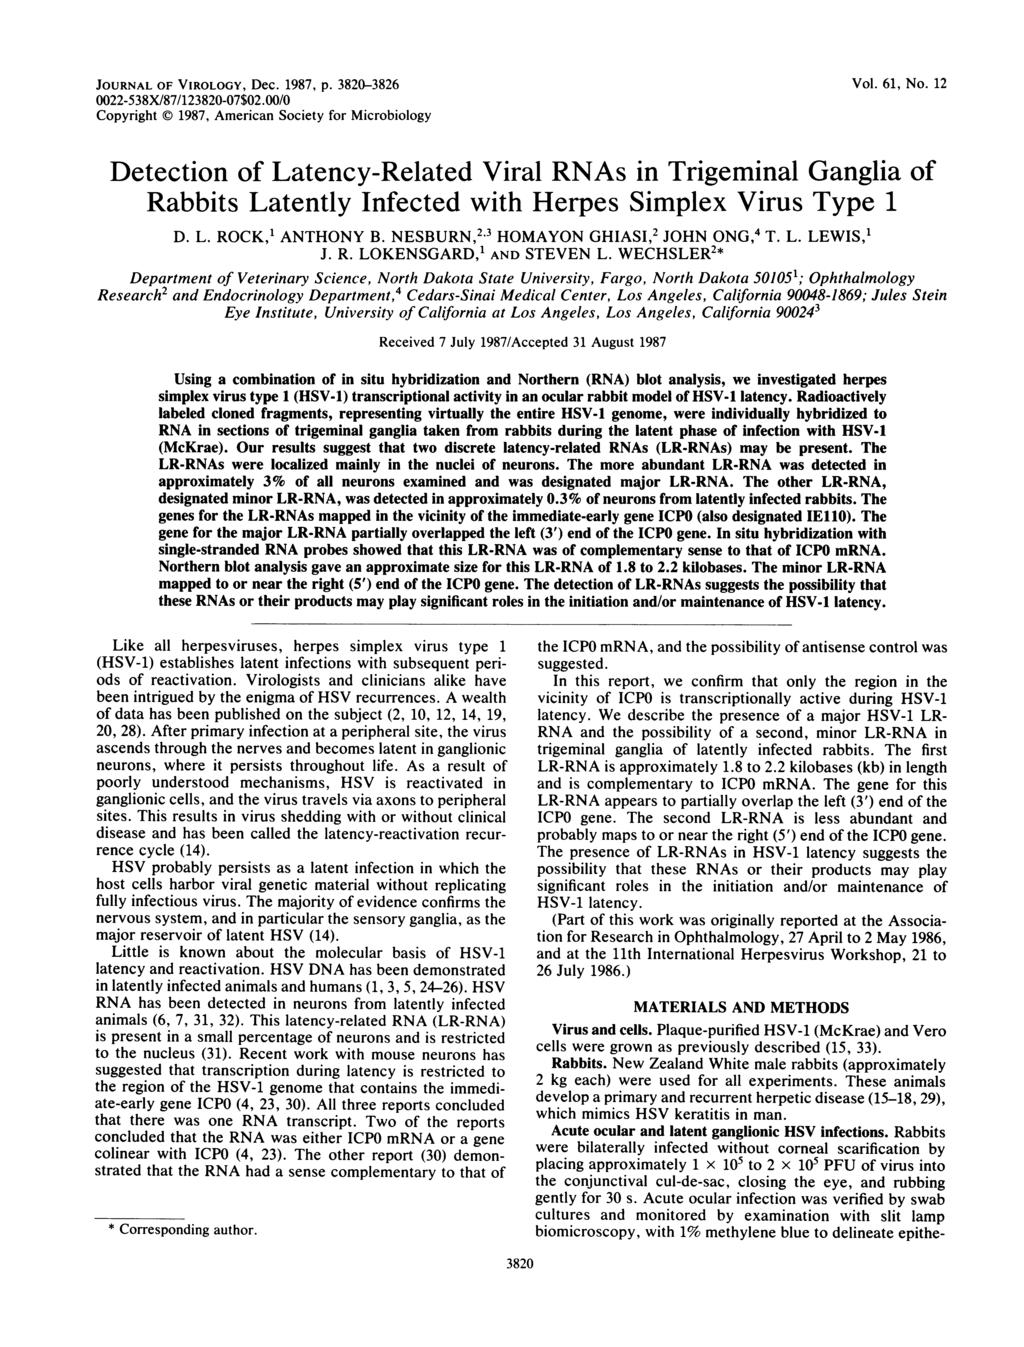 JOURNAL OF VIROLOGY, Dec. 1987, p. 3820-3826 0022-538X/87/123820-07$02.00/0 Copyright X3 1987, American Society for Microbiology Vol. 61, No.